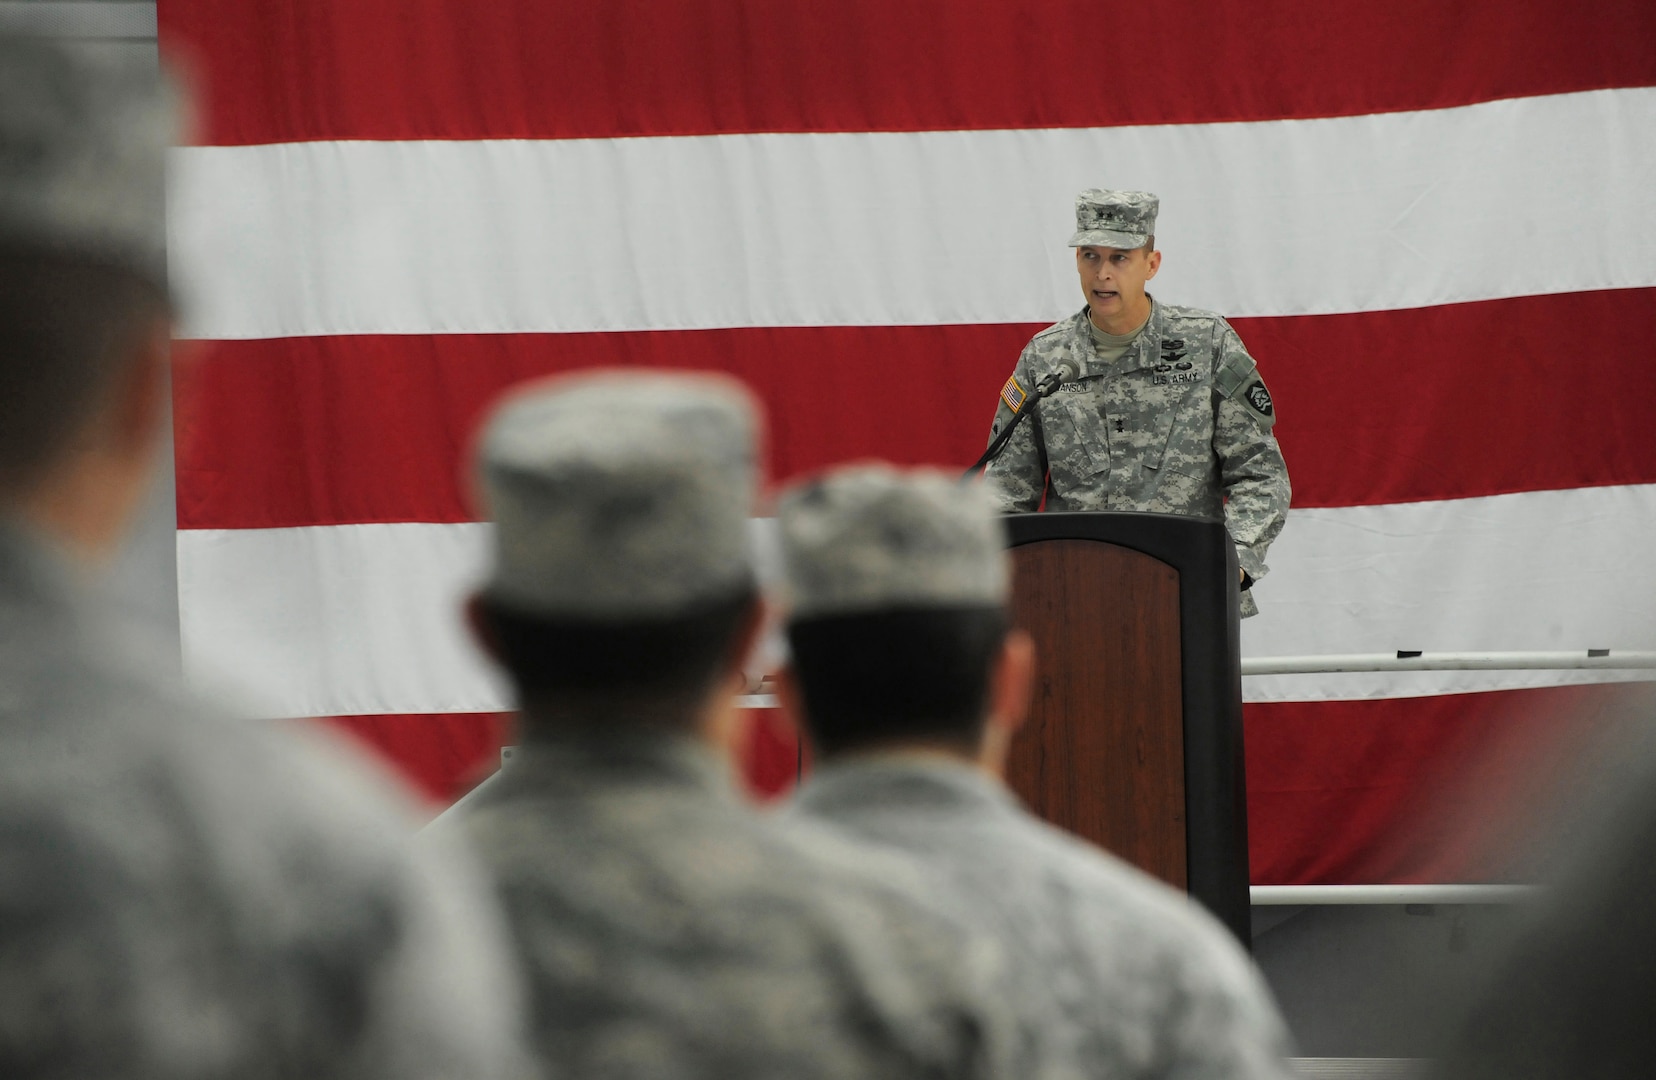 In a photo dated Dec. 7, 2014, then Army Maj. Gen. Daniel R. Hokanson, formerly the adjutant general of the Oregon National Guard, addresses Airmen with the 142nd Fighter Wing during a demobilization ceremony at Portland Air National Guard Base, Oregon. Hokanson was promoted to general and sworn in as the 29th chief of the National Guard Bureau Aug. 3, 2020. He is joined by two other former adjutants general – Army Lt. Gen. Jon Jensen, director of the Army National Guard, and Air Force Lt. Gen. Michael Loh, director of the Air National Guard – who are all serving in the National Guard’s top three positions.